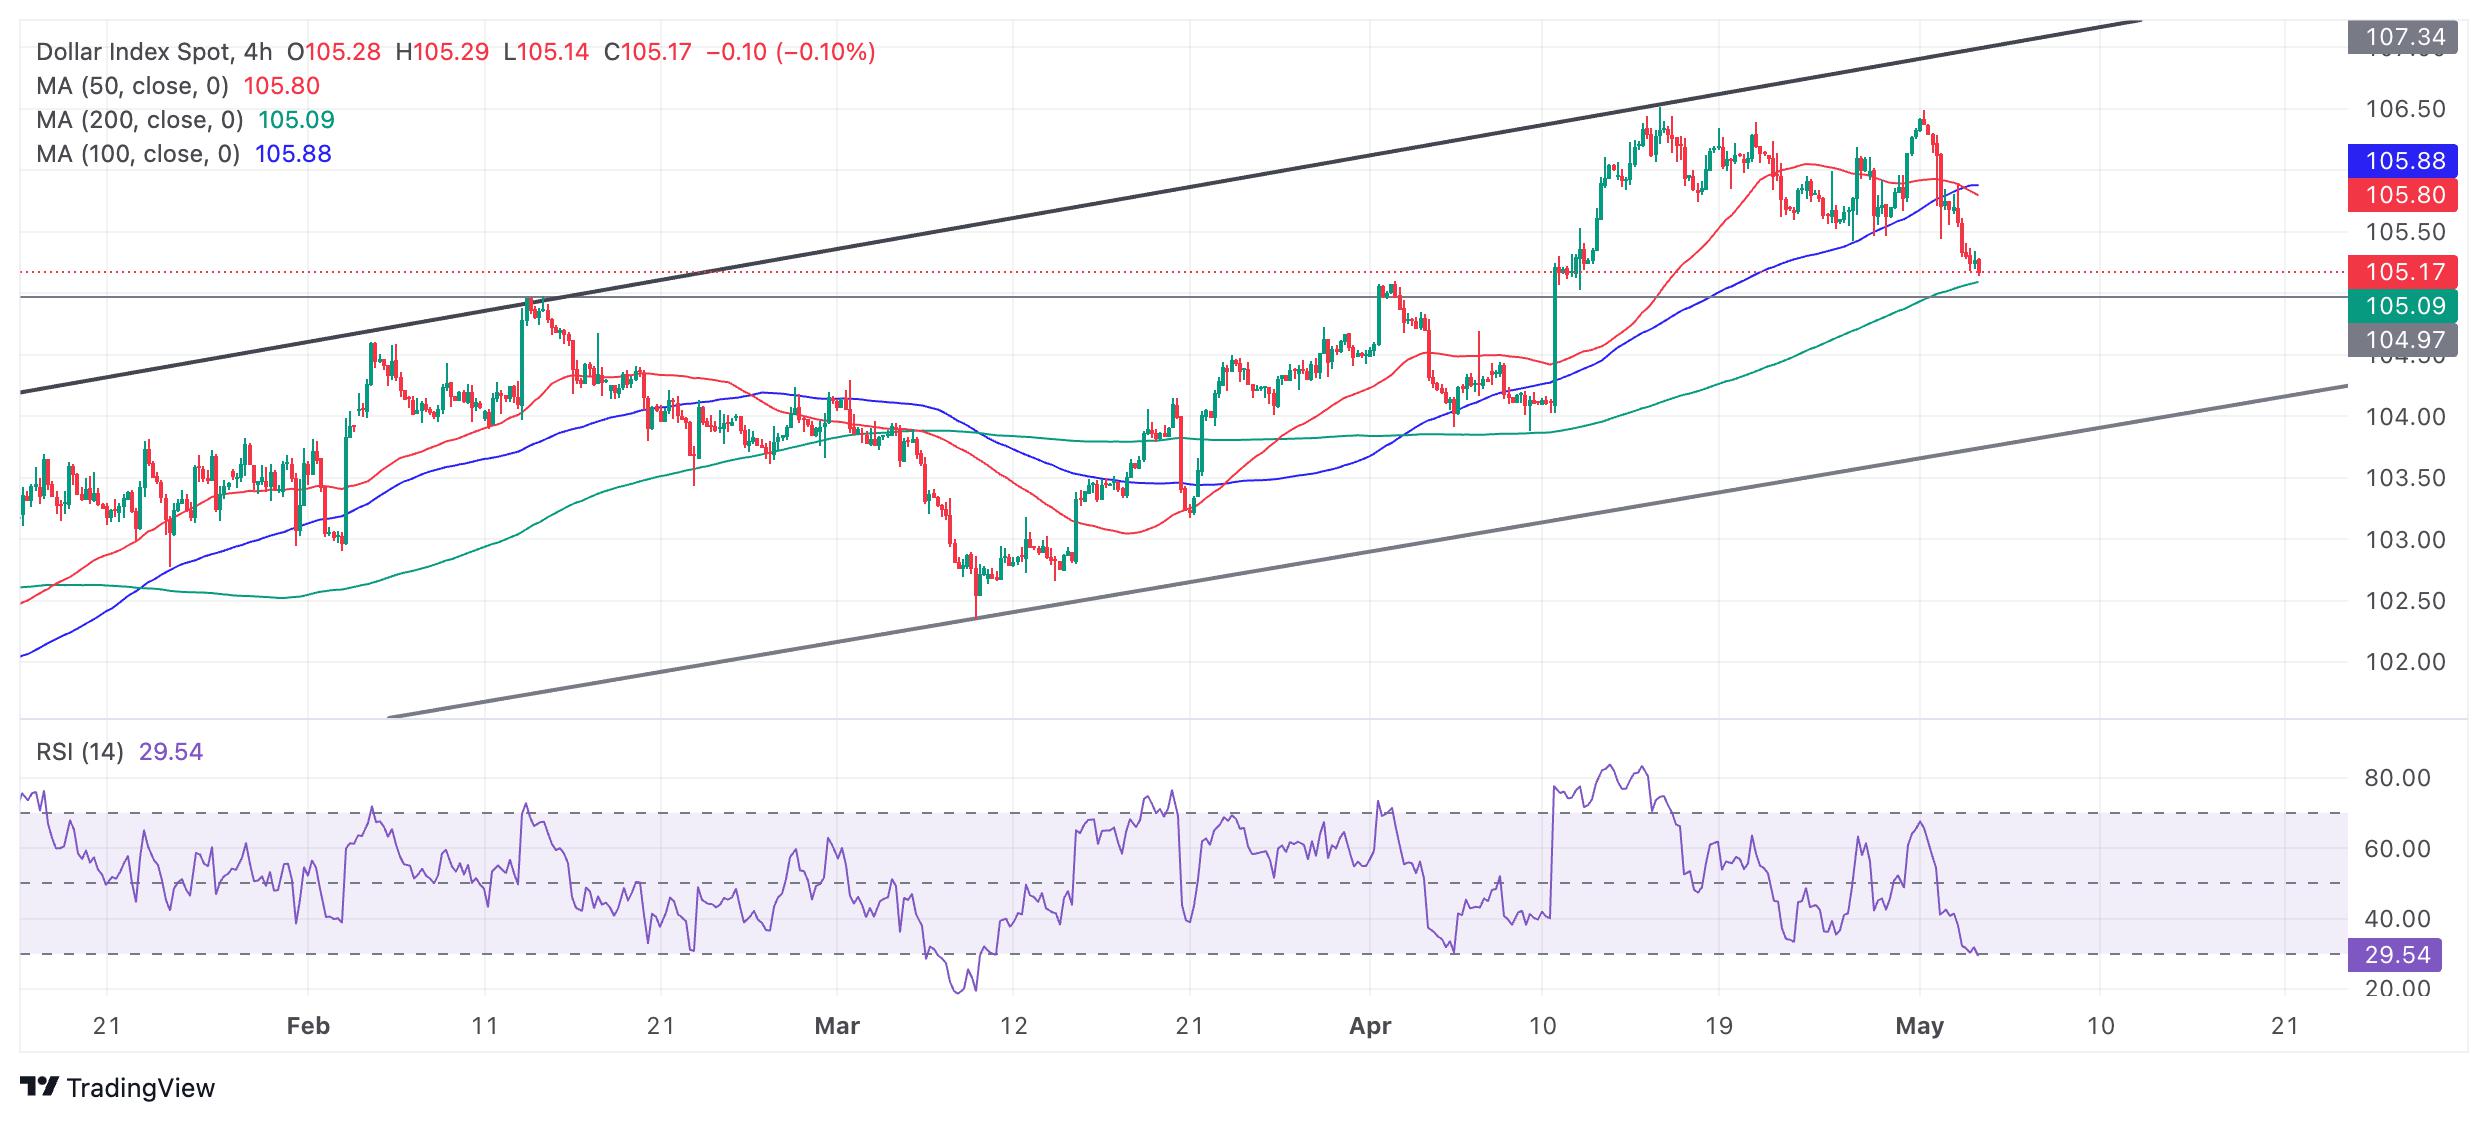 Dollar Index Price Forecast: DXY falling within channel